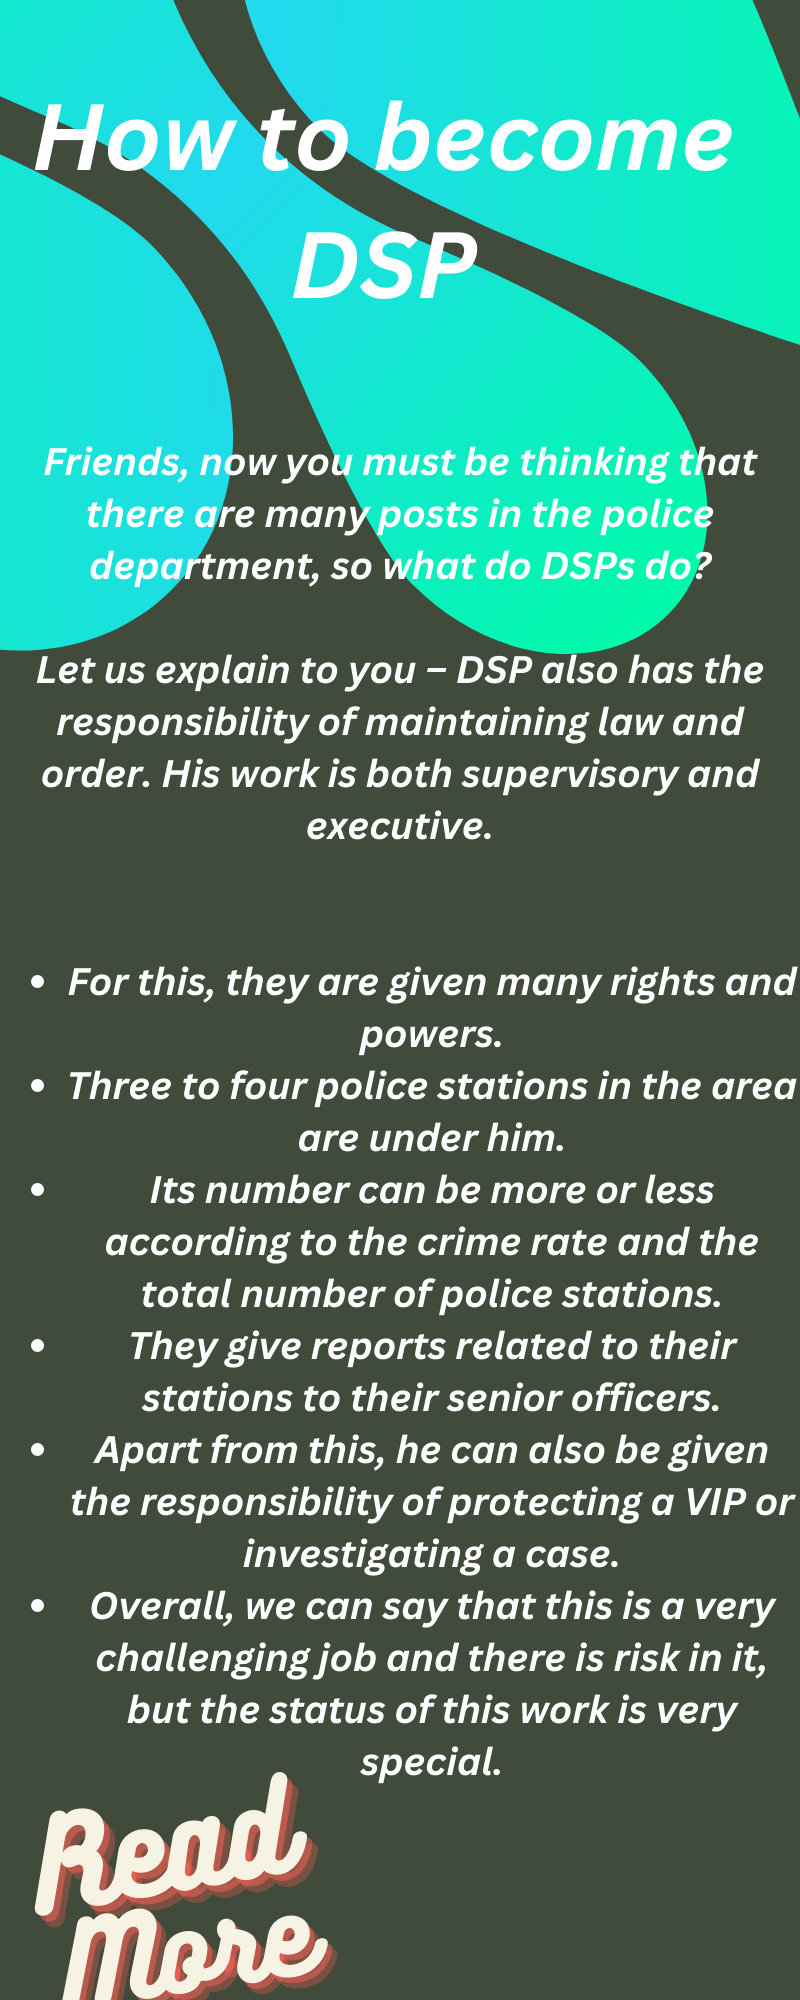 How To become DSP in India